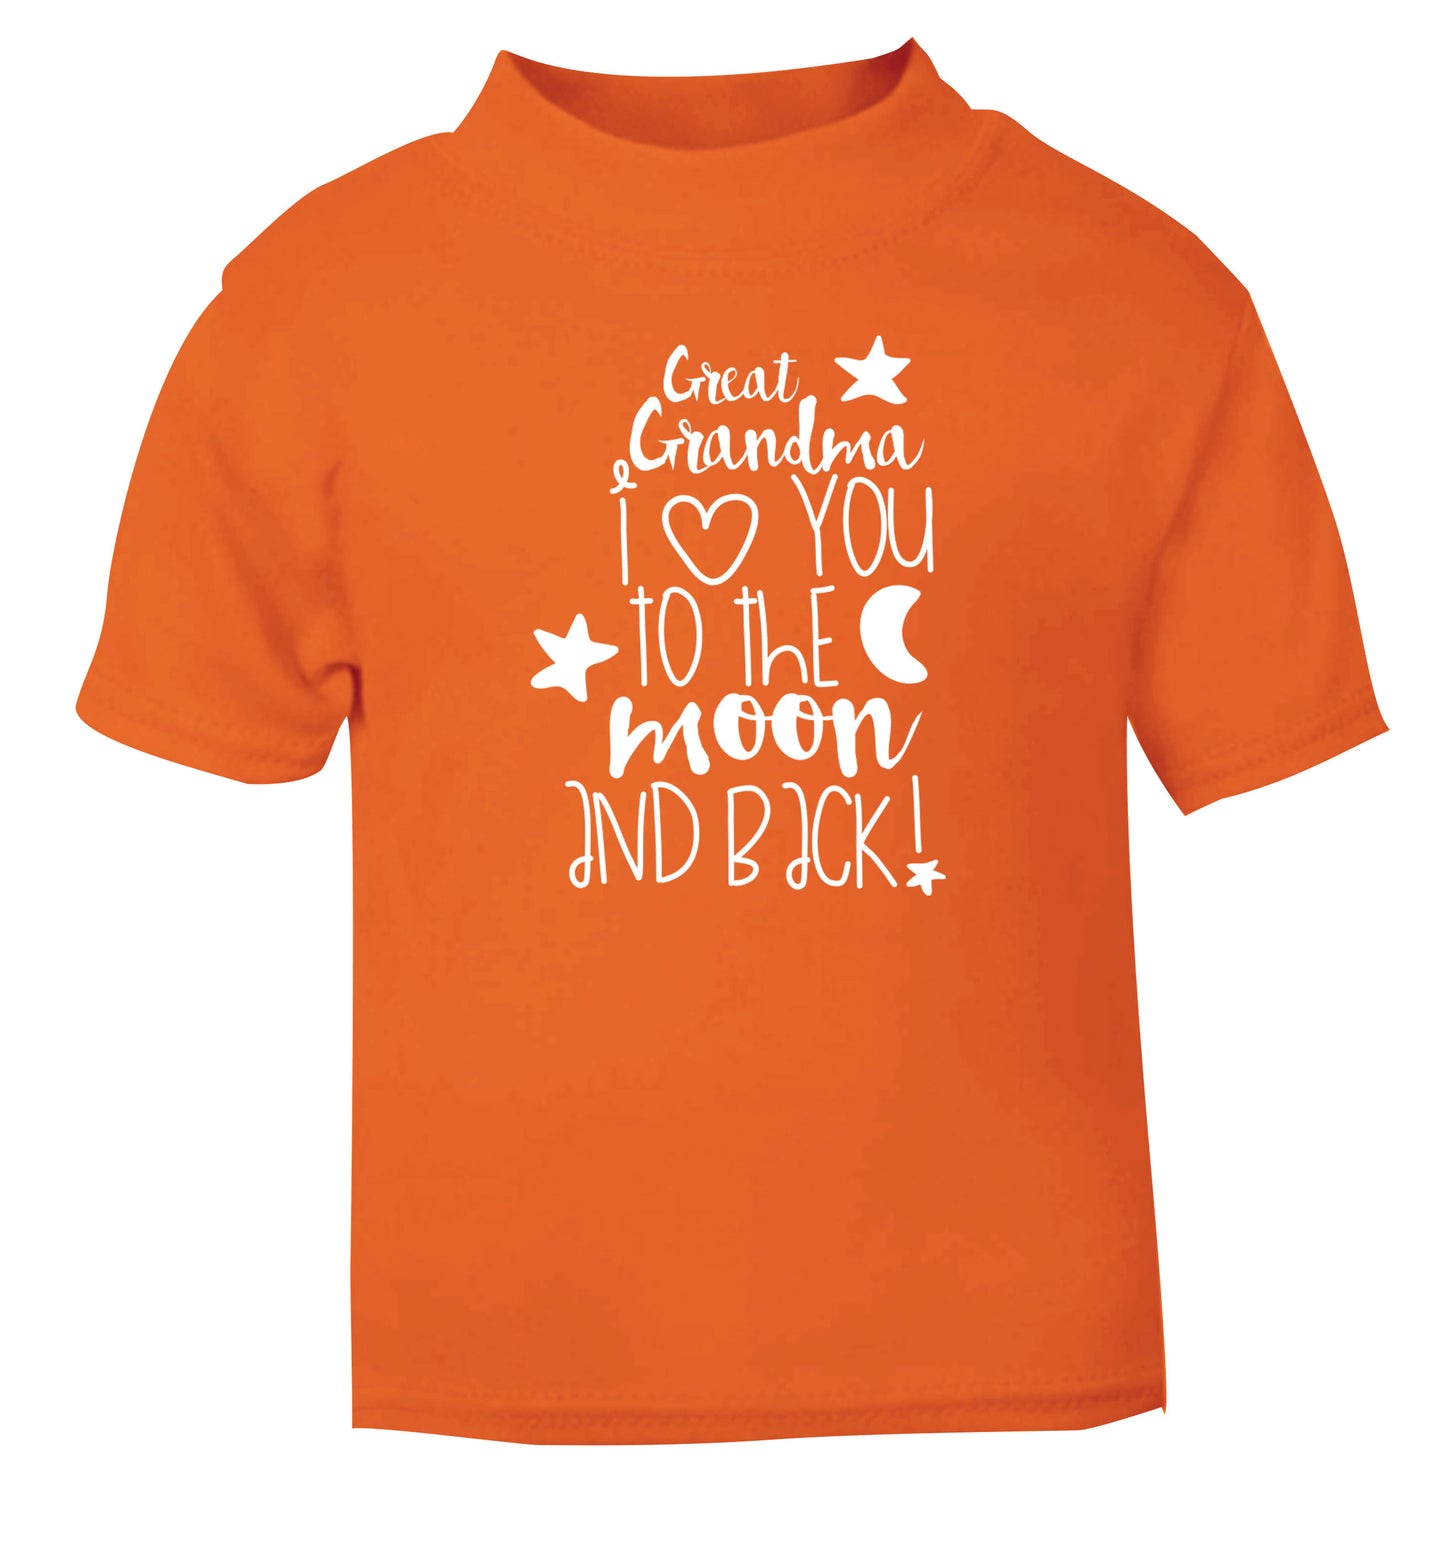 Great Grandma I love you to the moon and back orange Baby Toddler Tshirt 2 Years